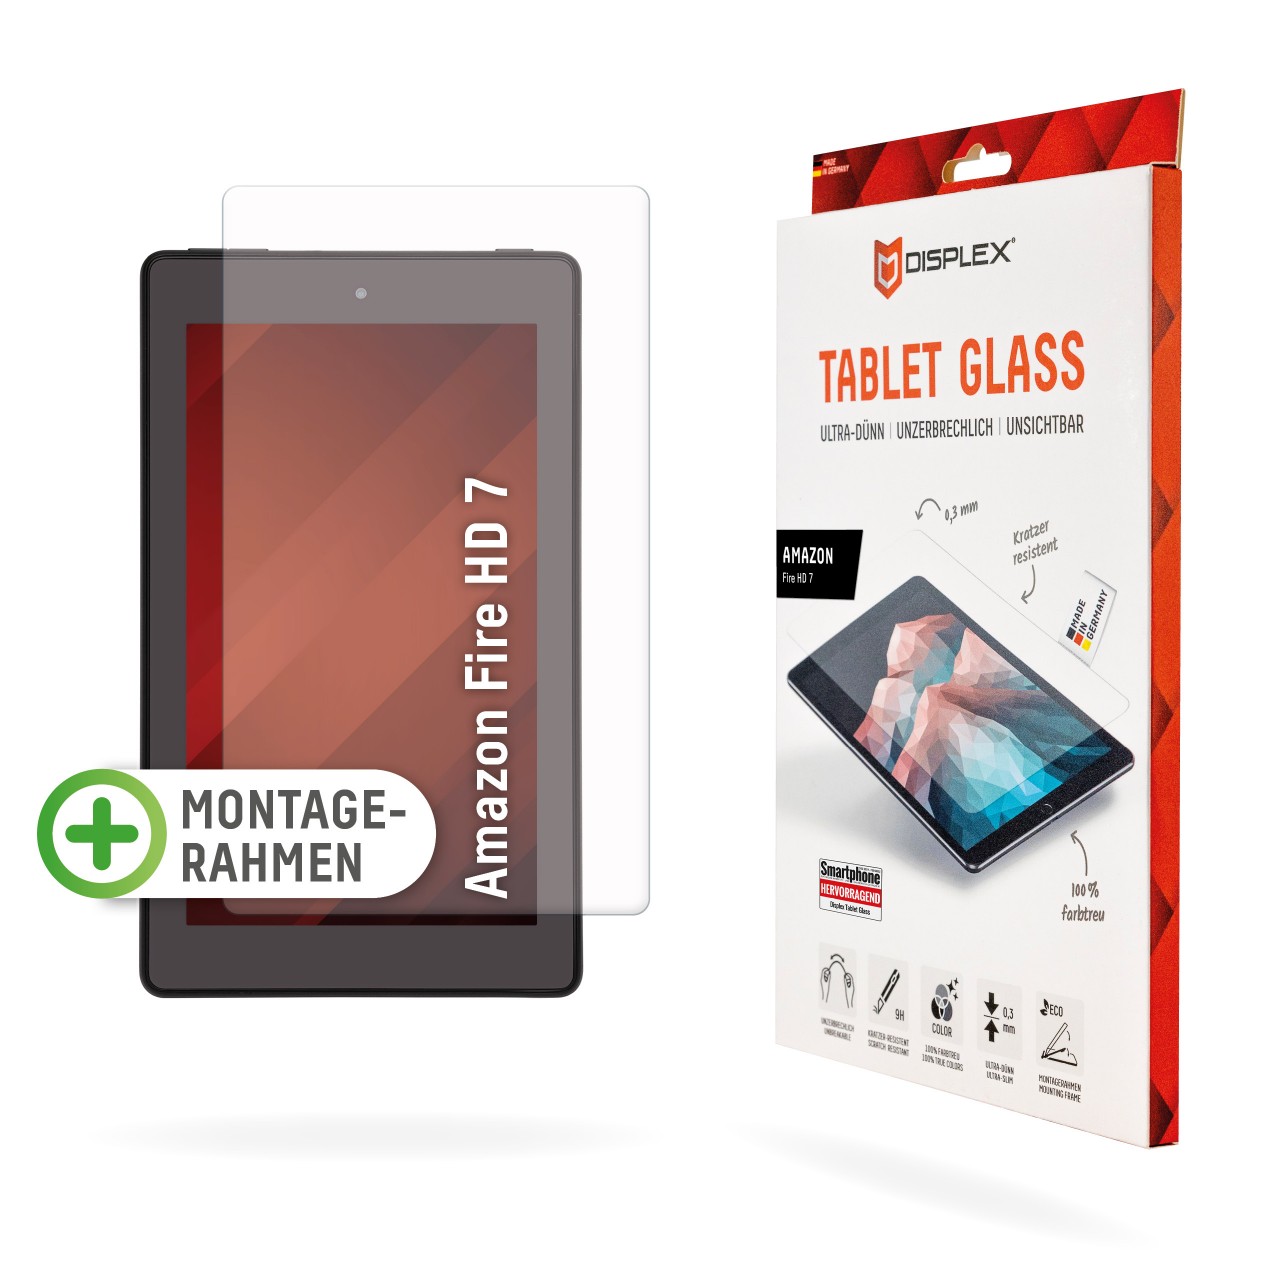 Amazon Fire 7 Tablet Glass